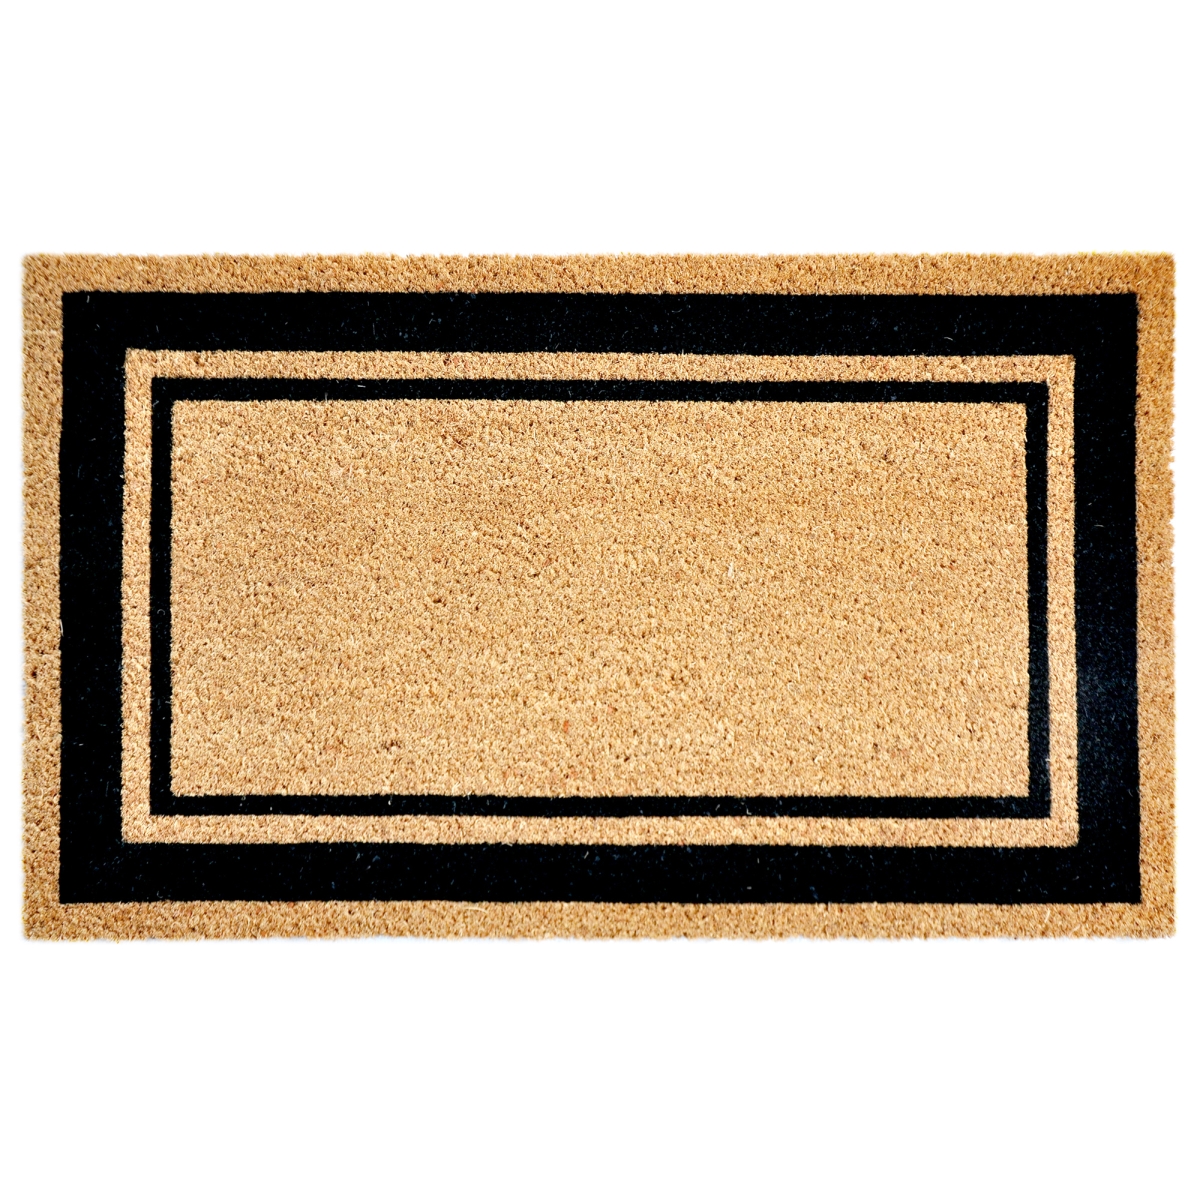 Ntr23223248 Liora Manne Natura Double Border Outdoor Mat, Black - 24 X 36 In.